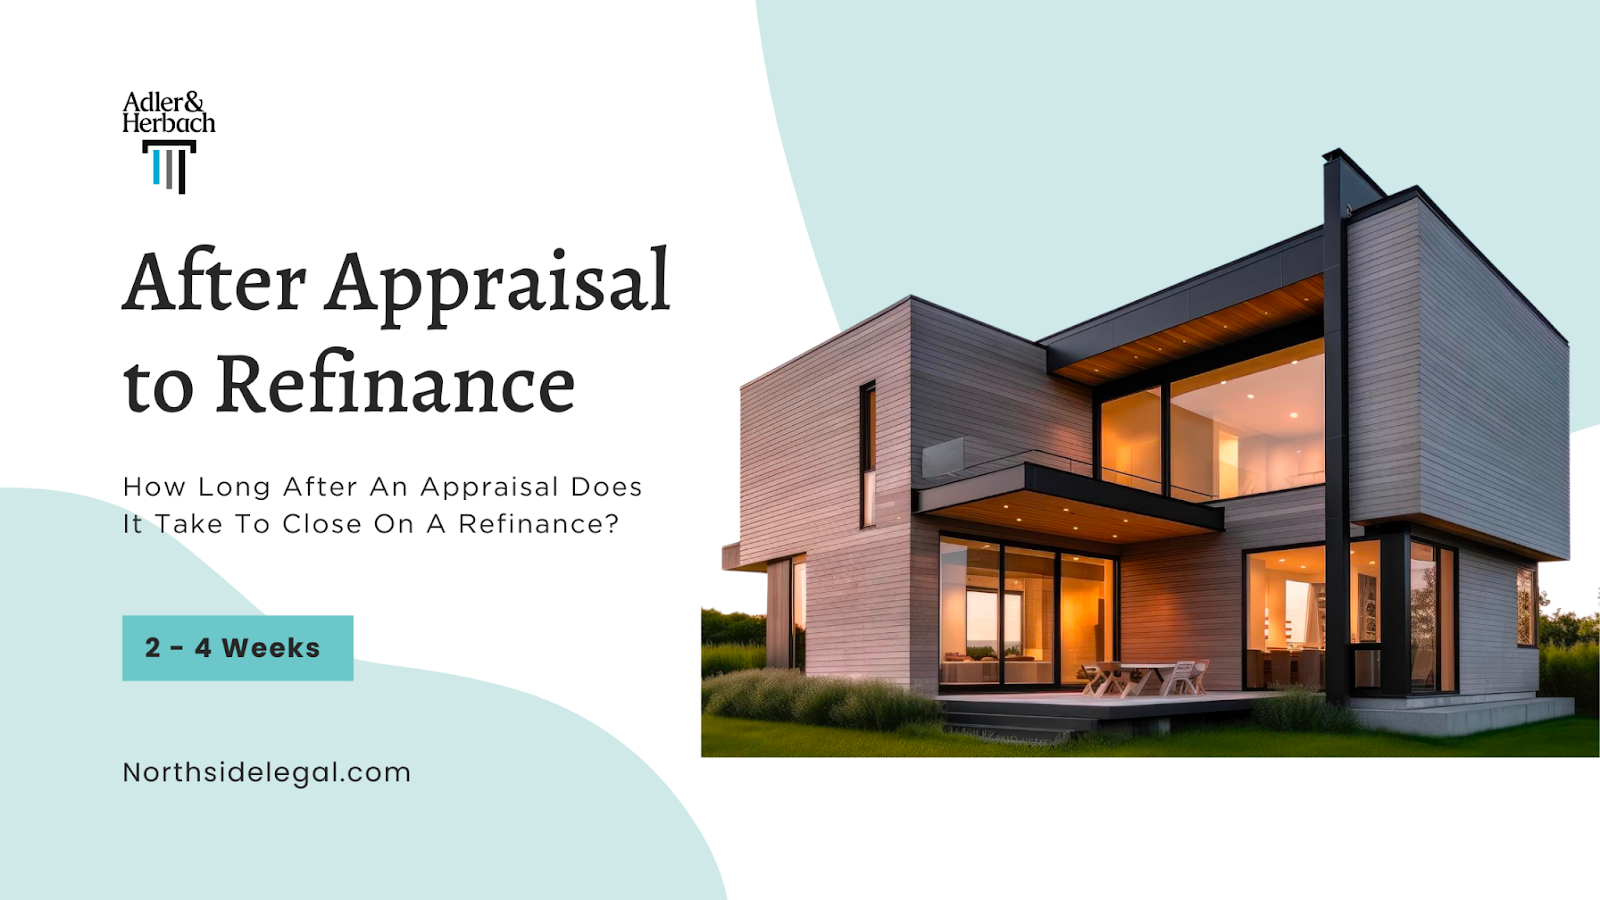 How Long Does It Take To Close On A Refinance After Appraisal?